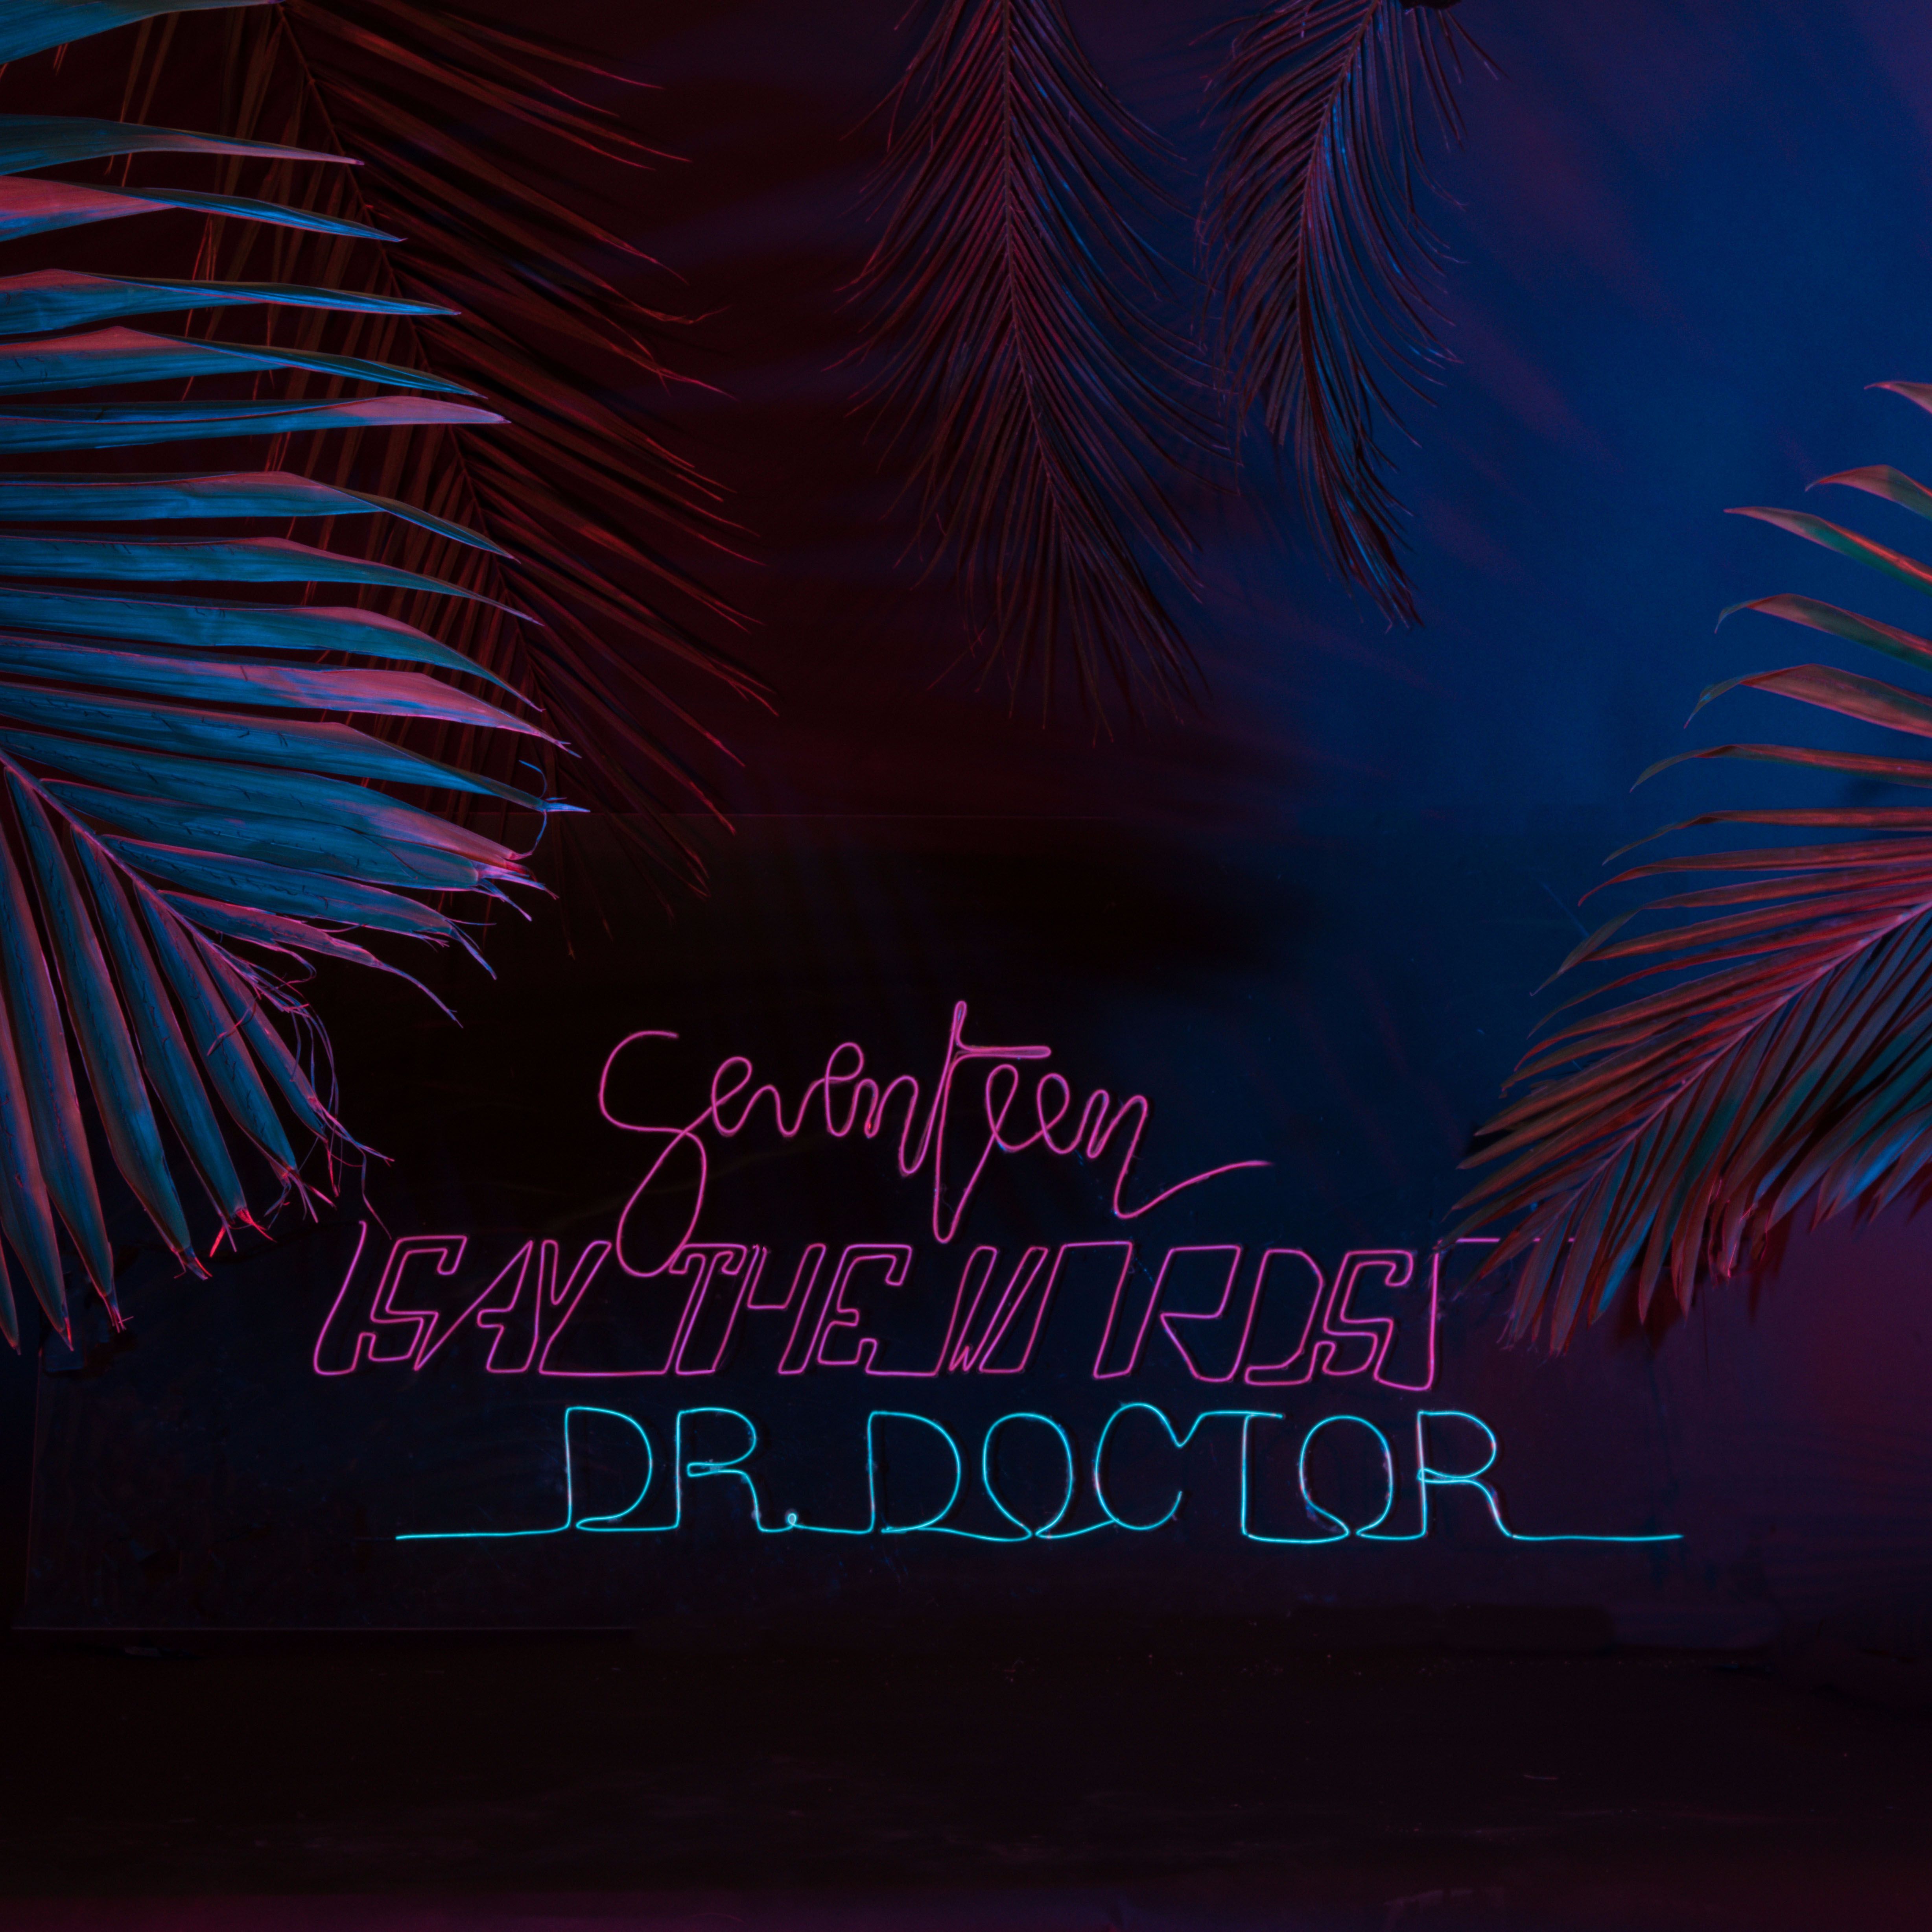 Dr. Doctor – “Seventeen (Say The Words)”